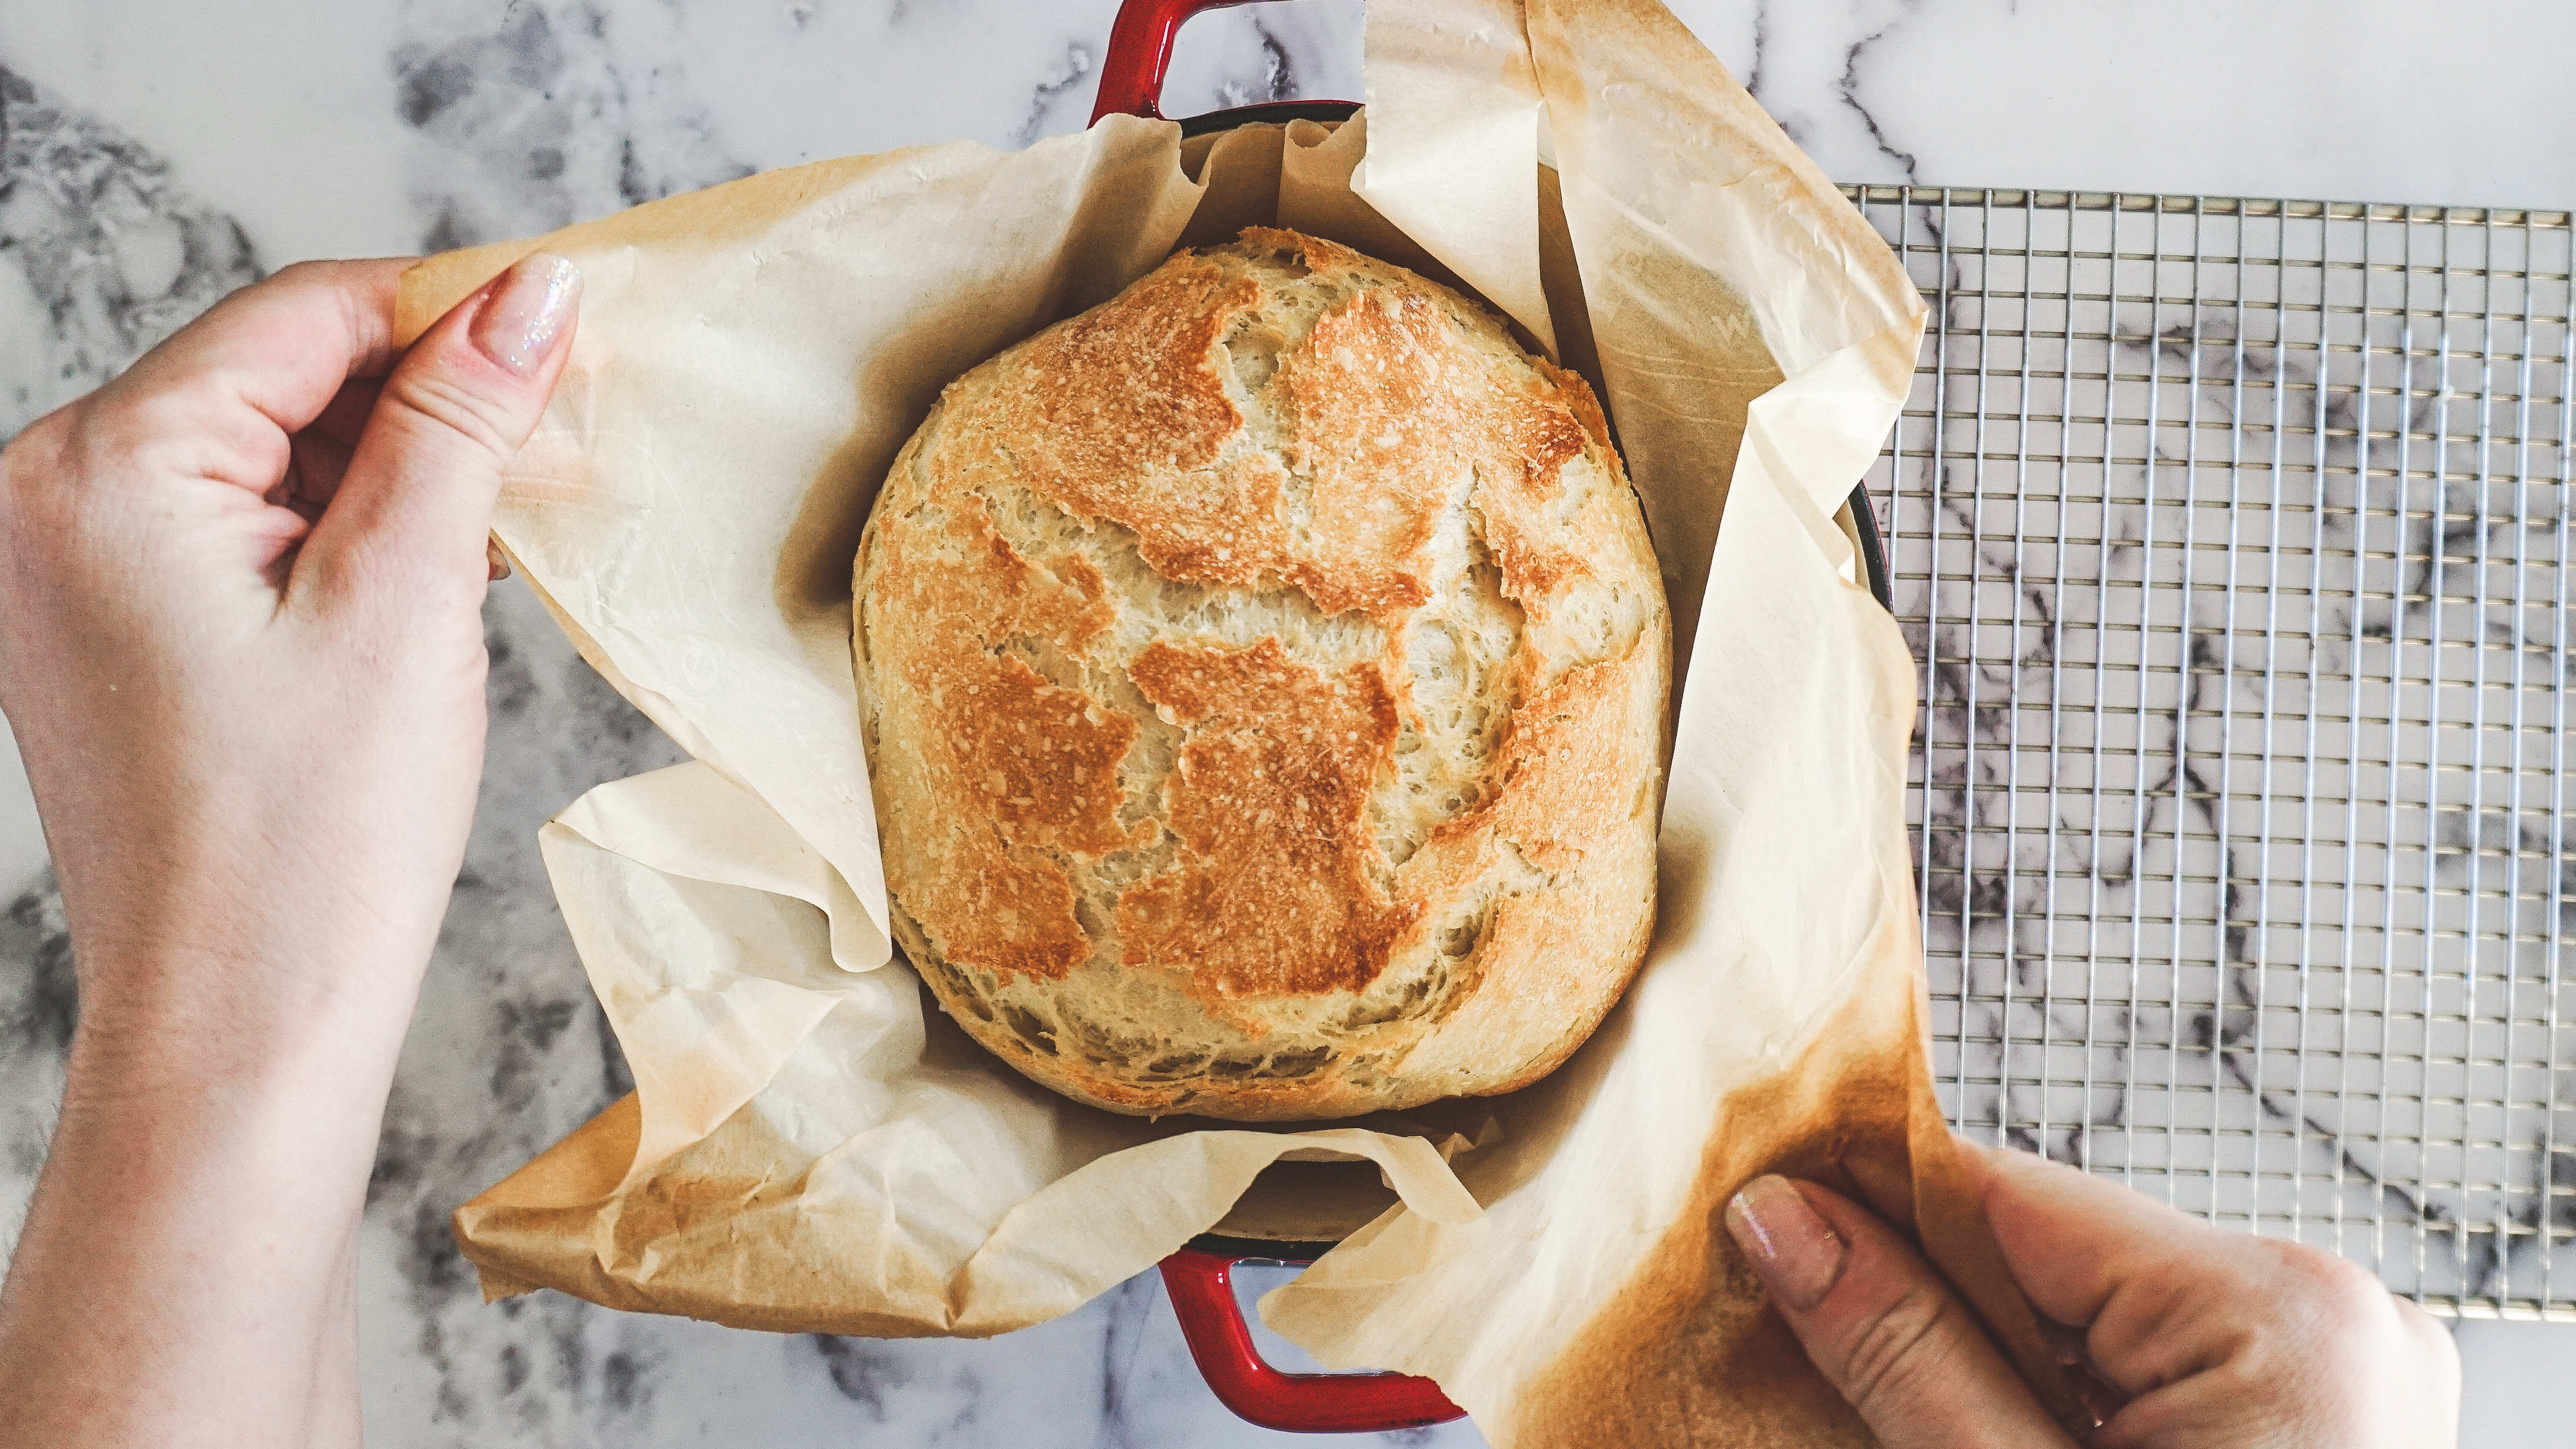 Dutch Oven No Knead Bread (with perfect crusty crust!) - Bowl of